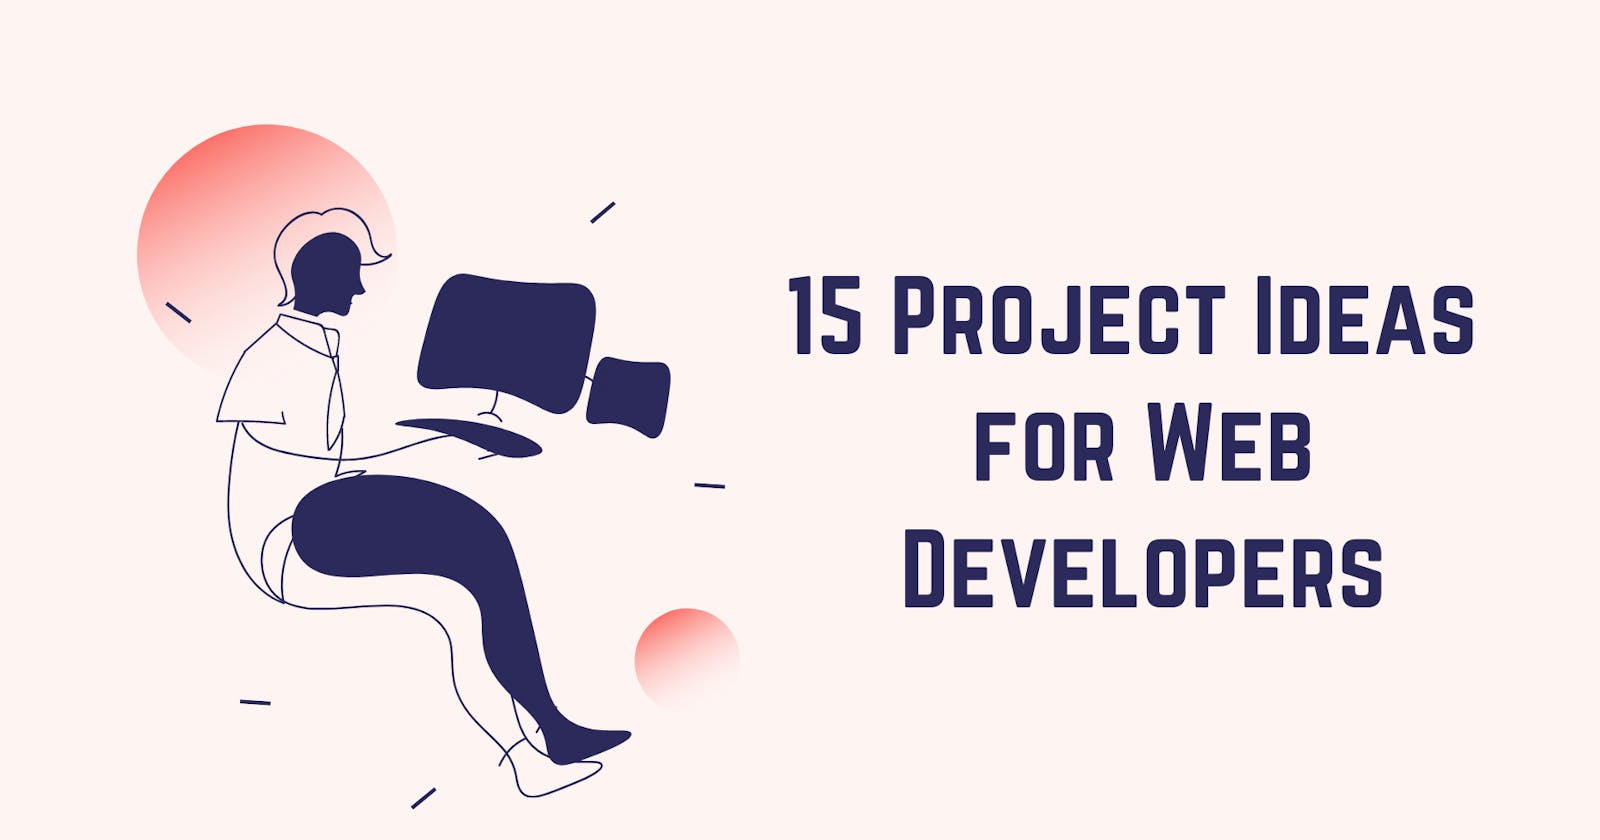 15 Project Ideas for Web Developers